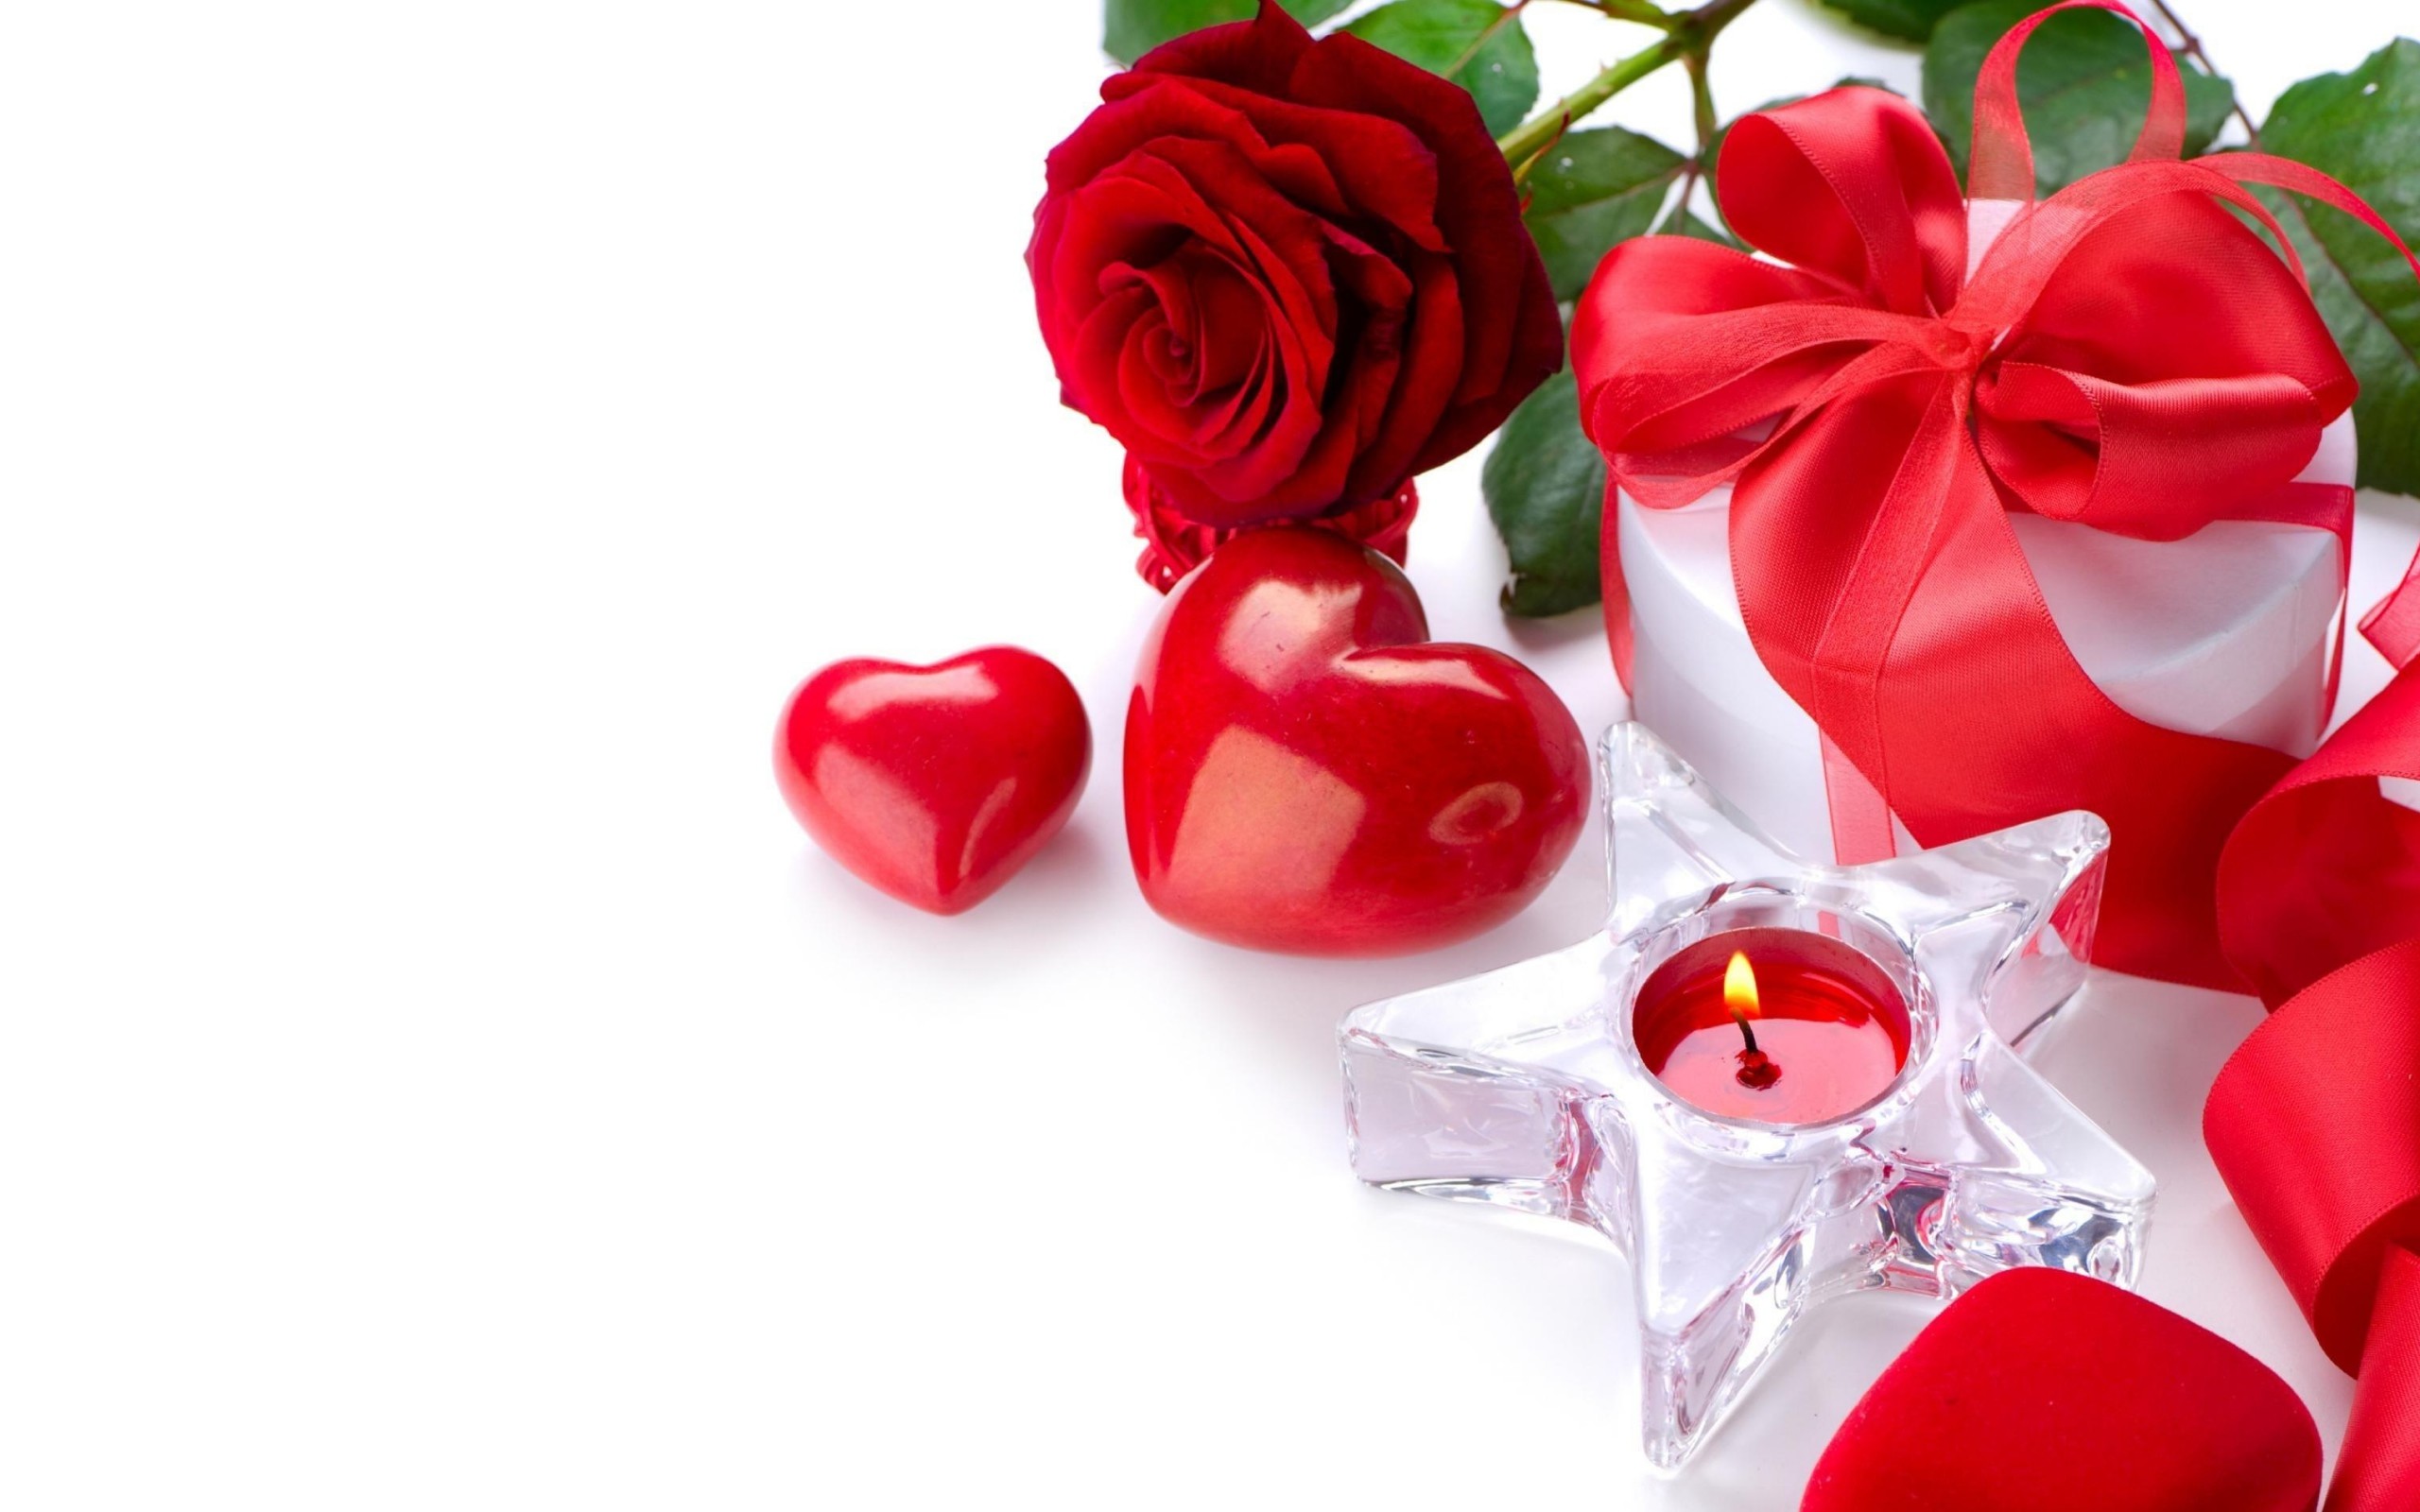 2560x1600 HQ Wallpapers Plus provides different size of Happy Valentines Day Roses Hd  Images. You can